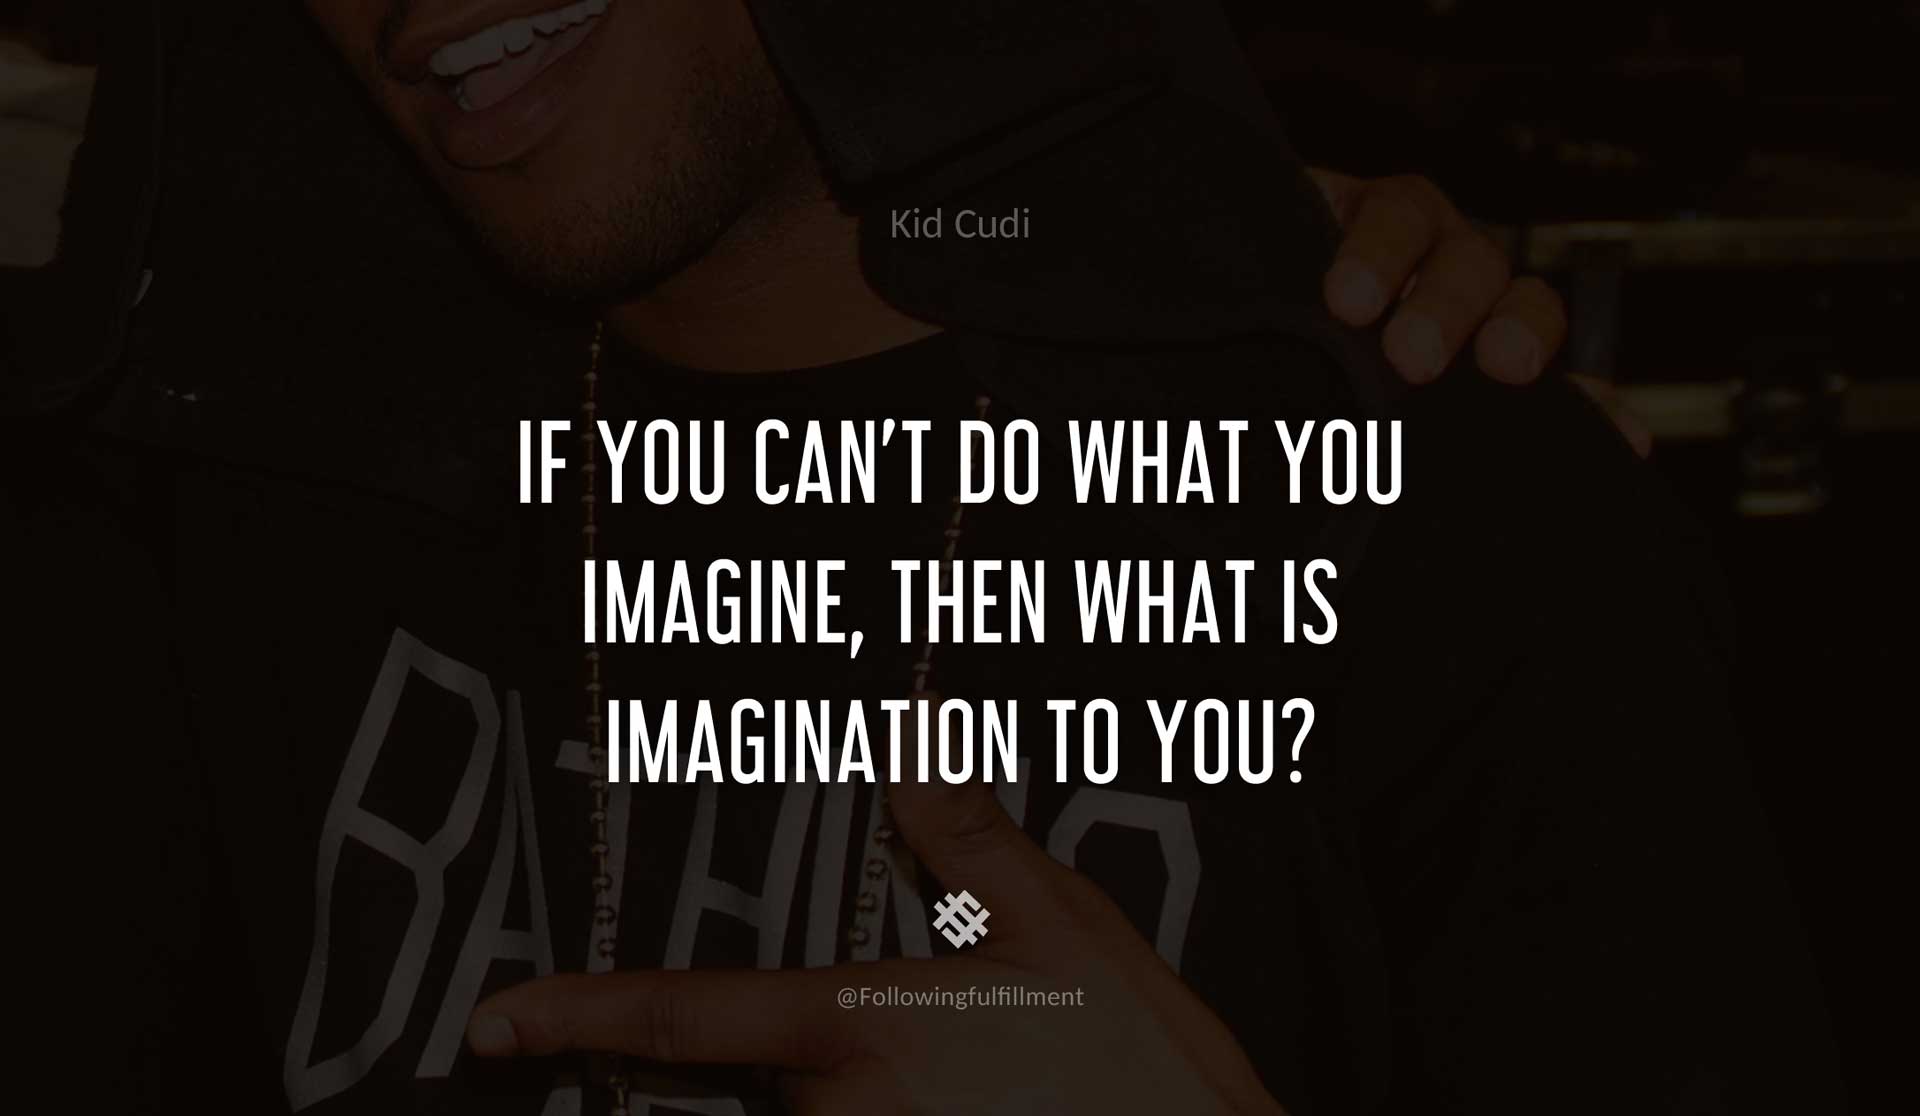 If-you-can't-do-what-you-imagine,-then-what-is-imagination-to-you--KID-CUDI-Quote.jpg